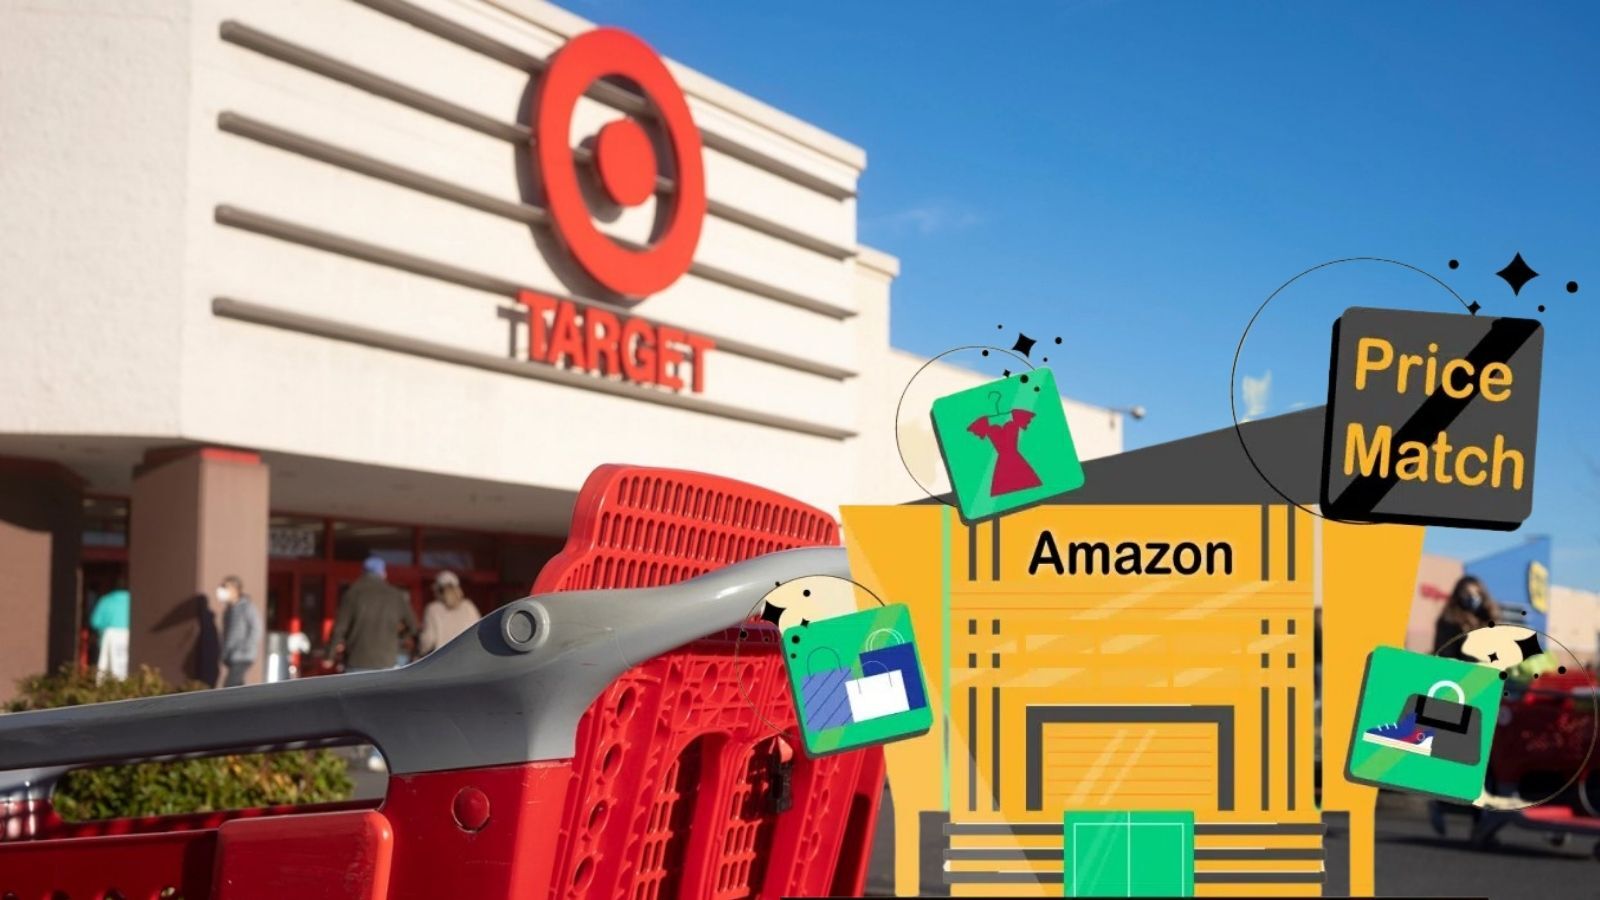 Does Target Price Match Amazon? (All You Need to Know)